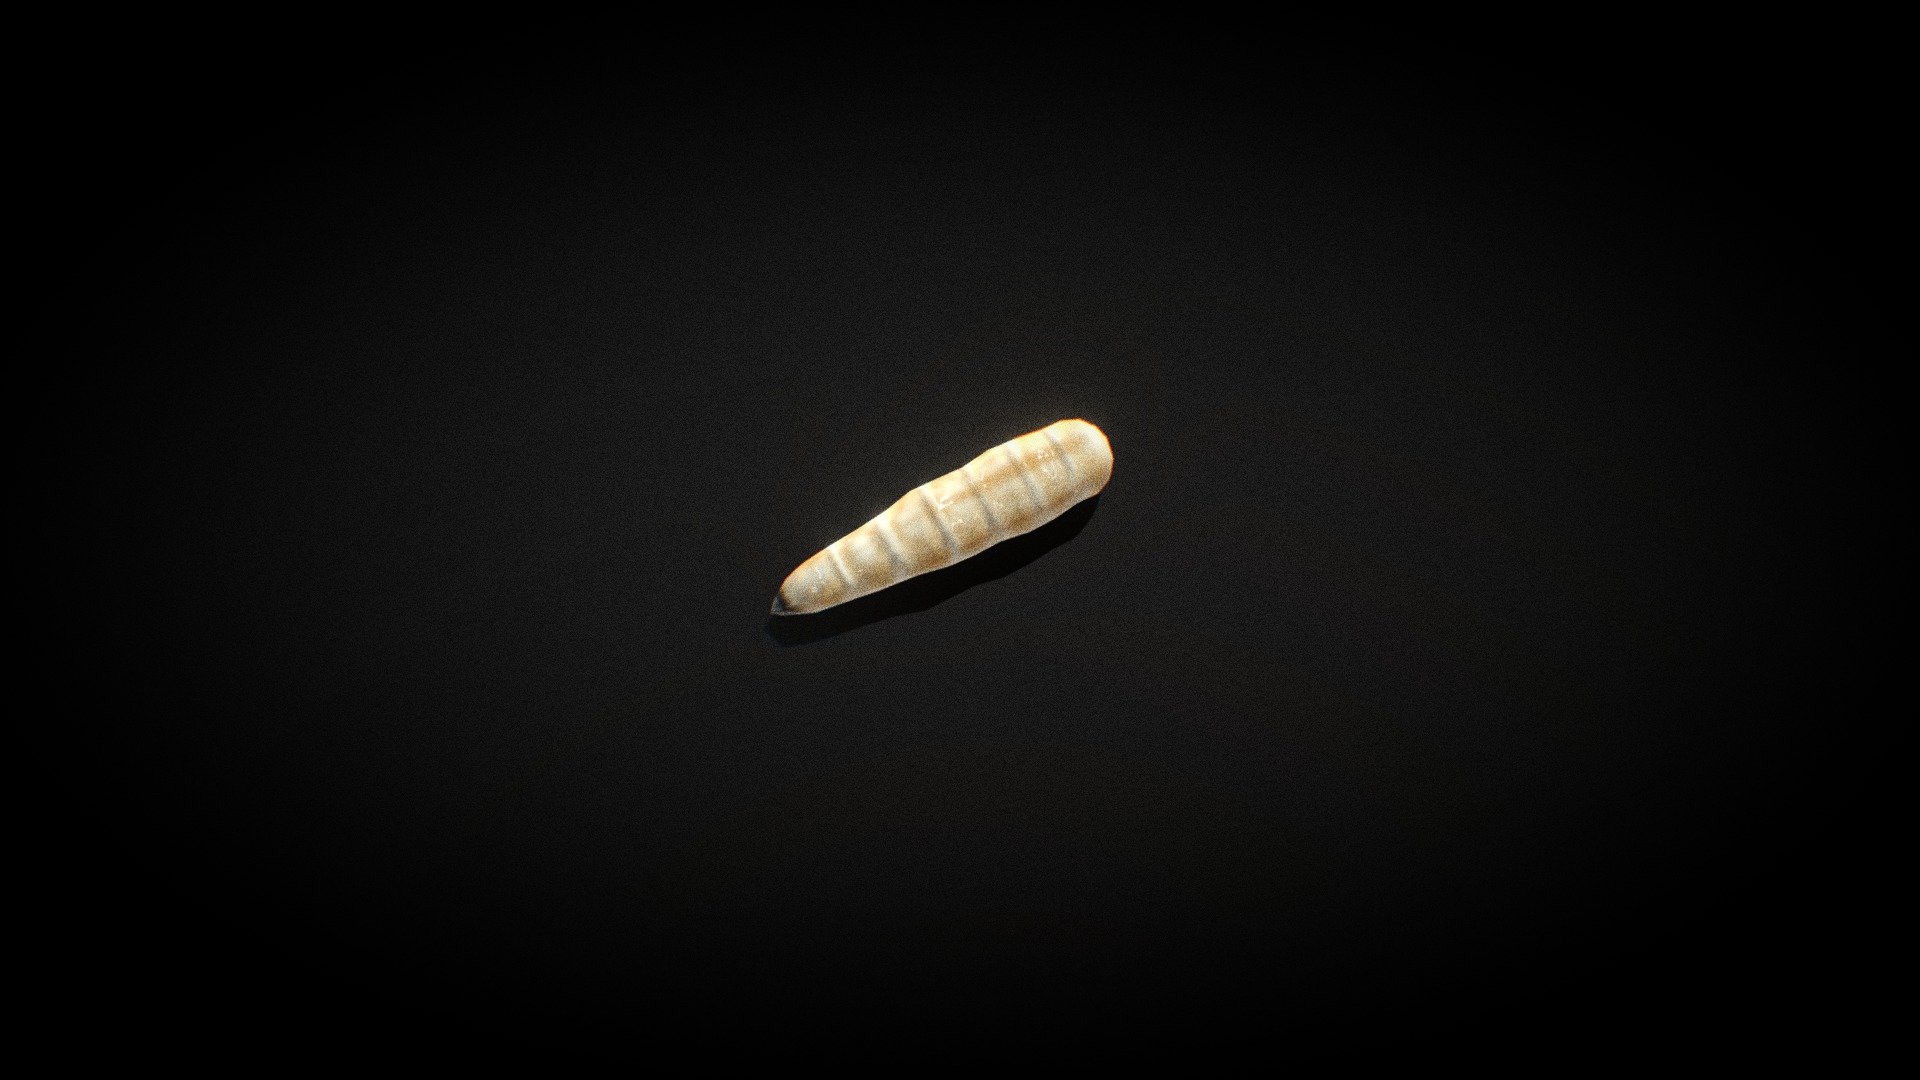 Its a maggot! This is a Unity 3d asset. You can find it on the Asset Store: LB3D, maggot 3d model